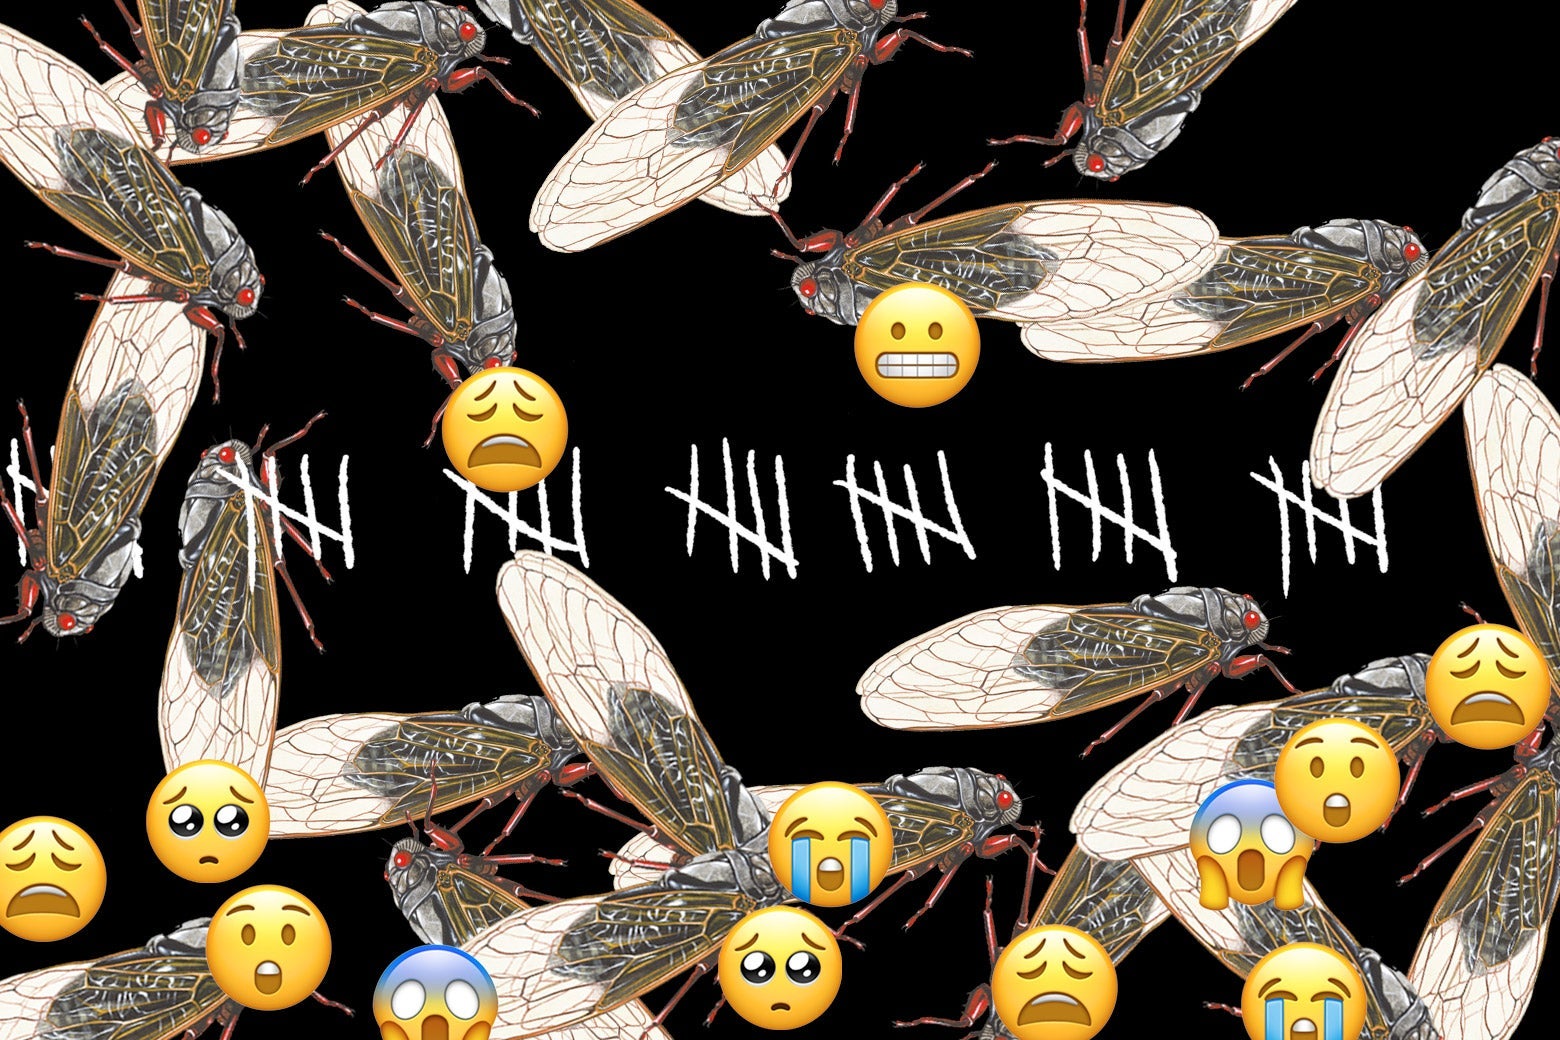 A collage of cicadas, grimacing and crying emojis, and hash marks counting days.